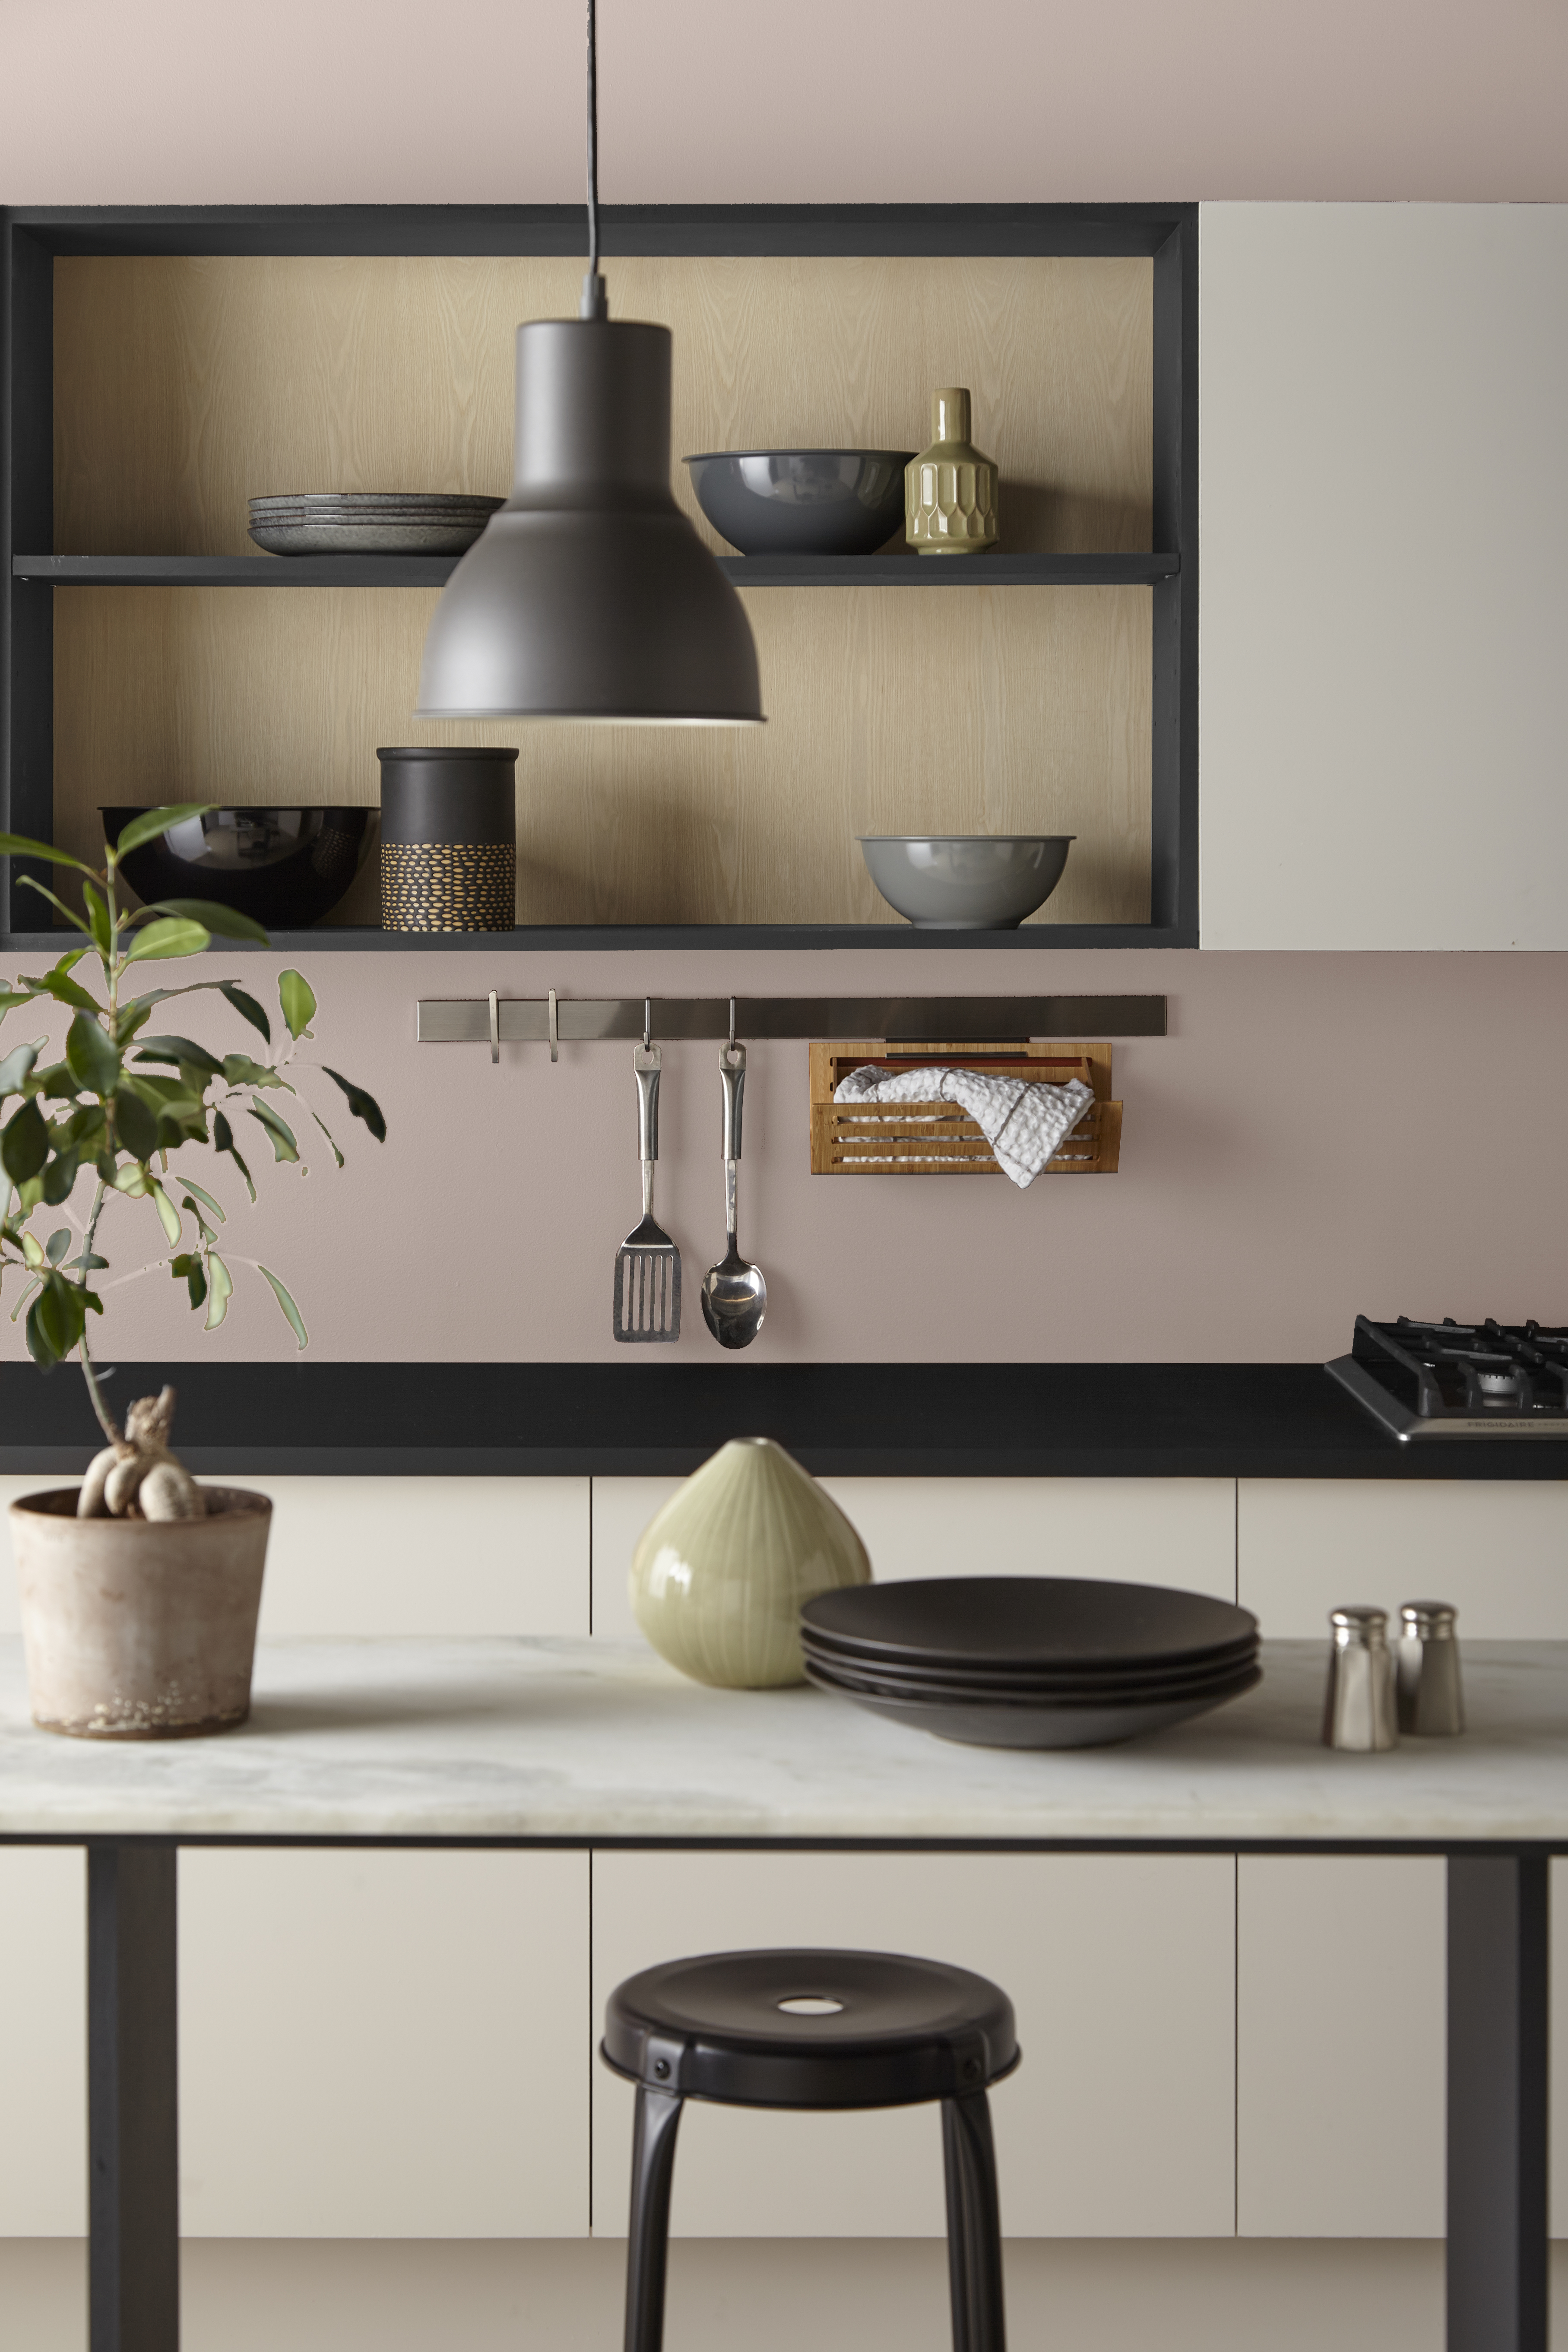 A modern kitchen with walls painted in Smokey Pink and contrasting white and black cabinets and trim